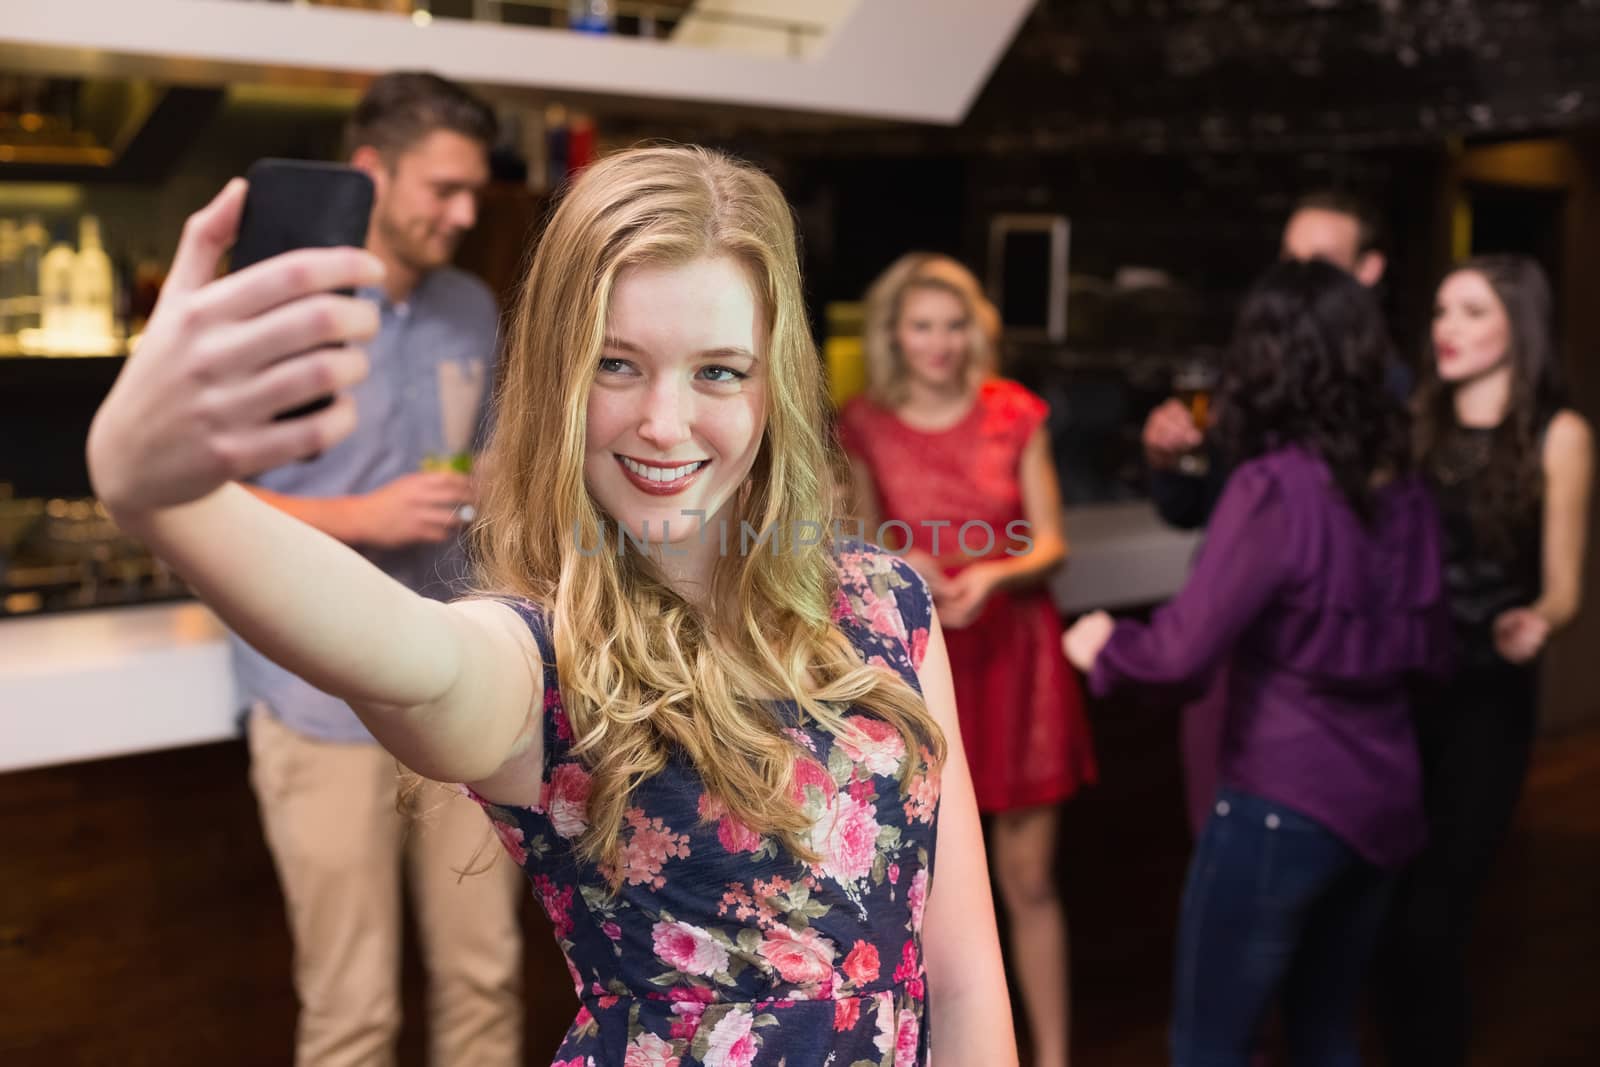 Pretty blonde taking a selfie at the bar